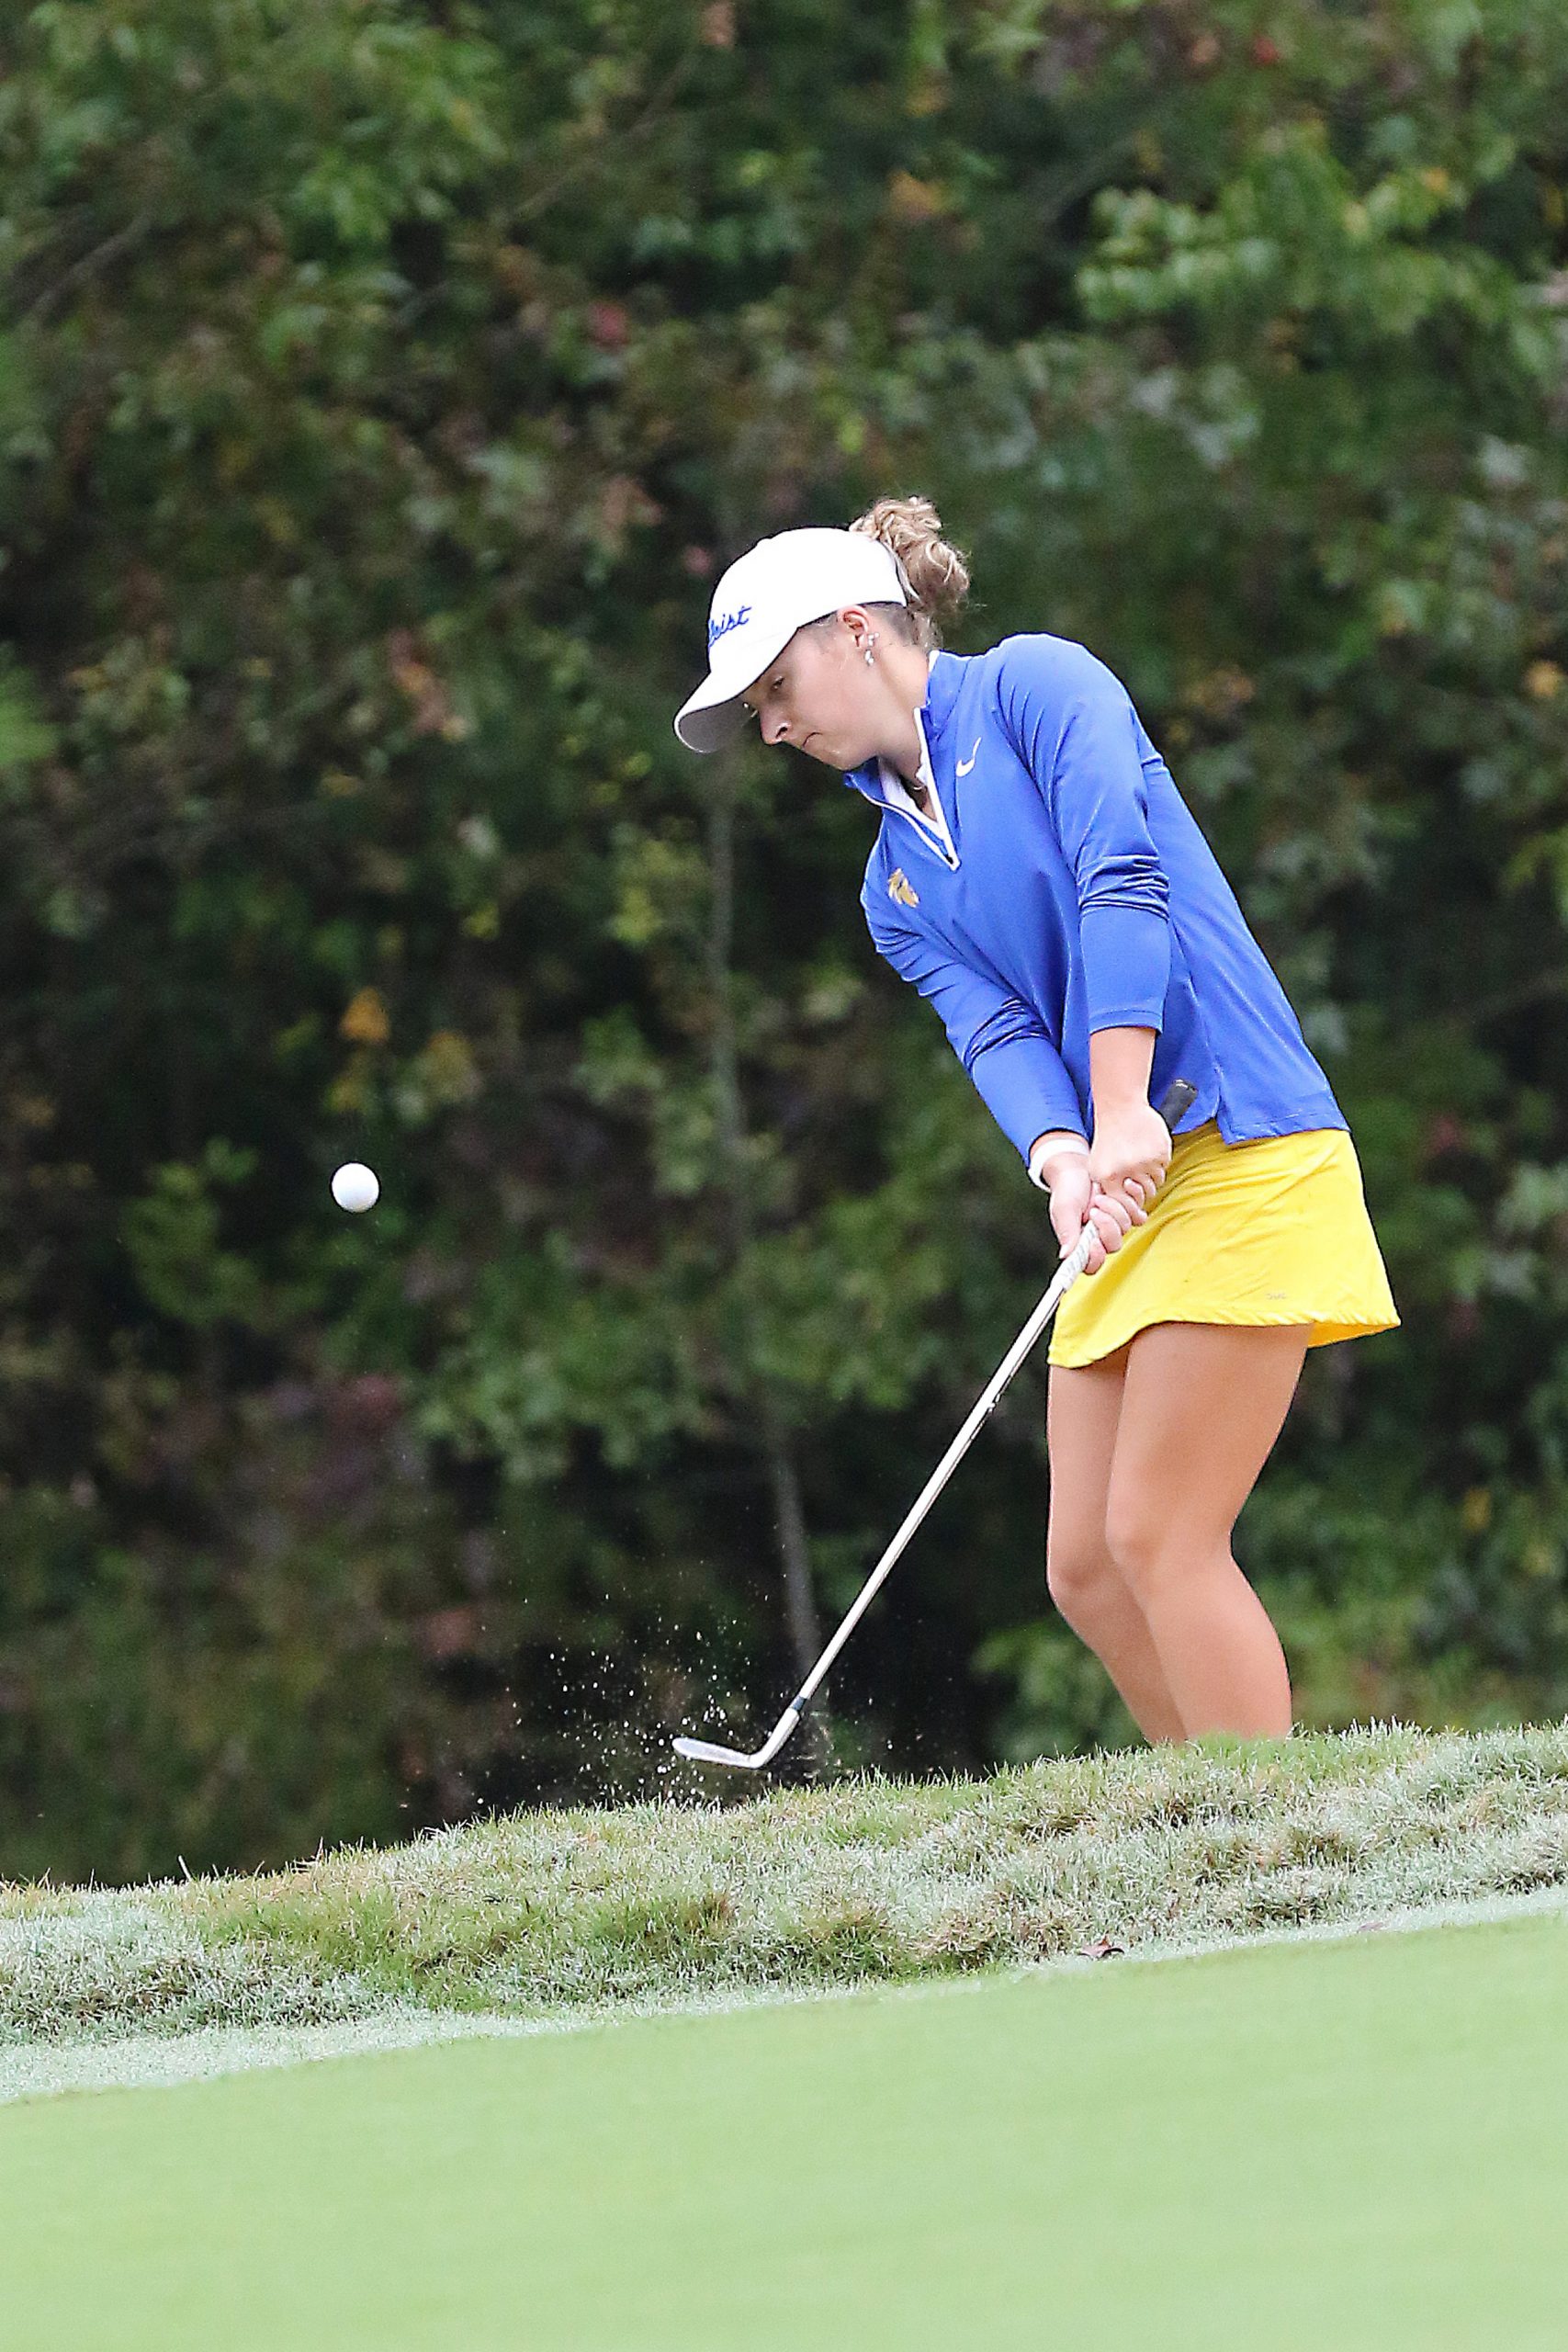 The Midlands took away team honors as well as the individual award in Class 5A girls’ golf this year. Isabella Rawl of Lexington was the individual winner when she shot a 137 to win the title by one stroke.  Photography courtesy of Lexington High School